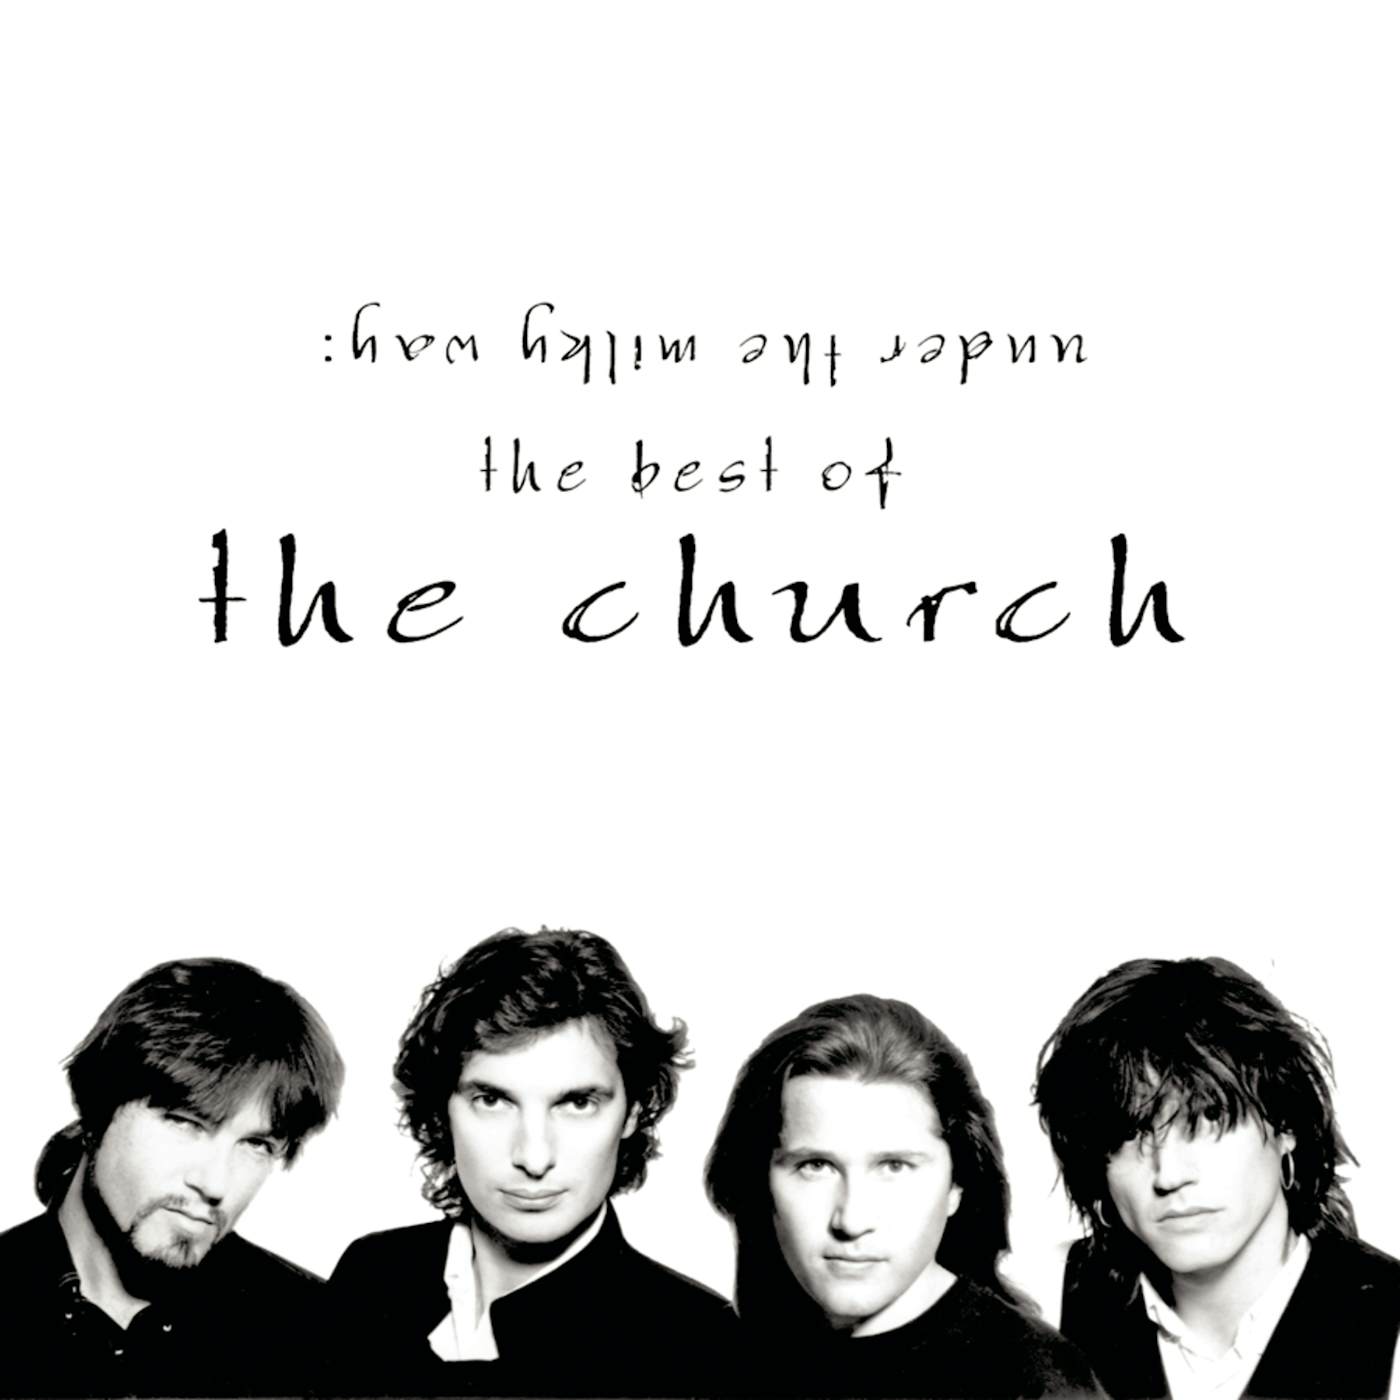 The Church UNDER THE MILKY WAY CD